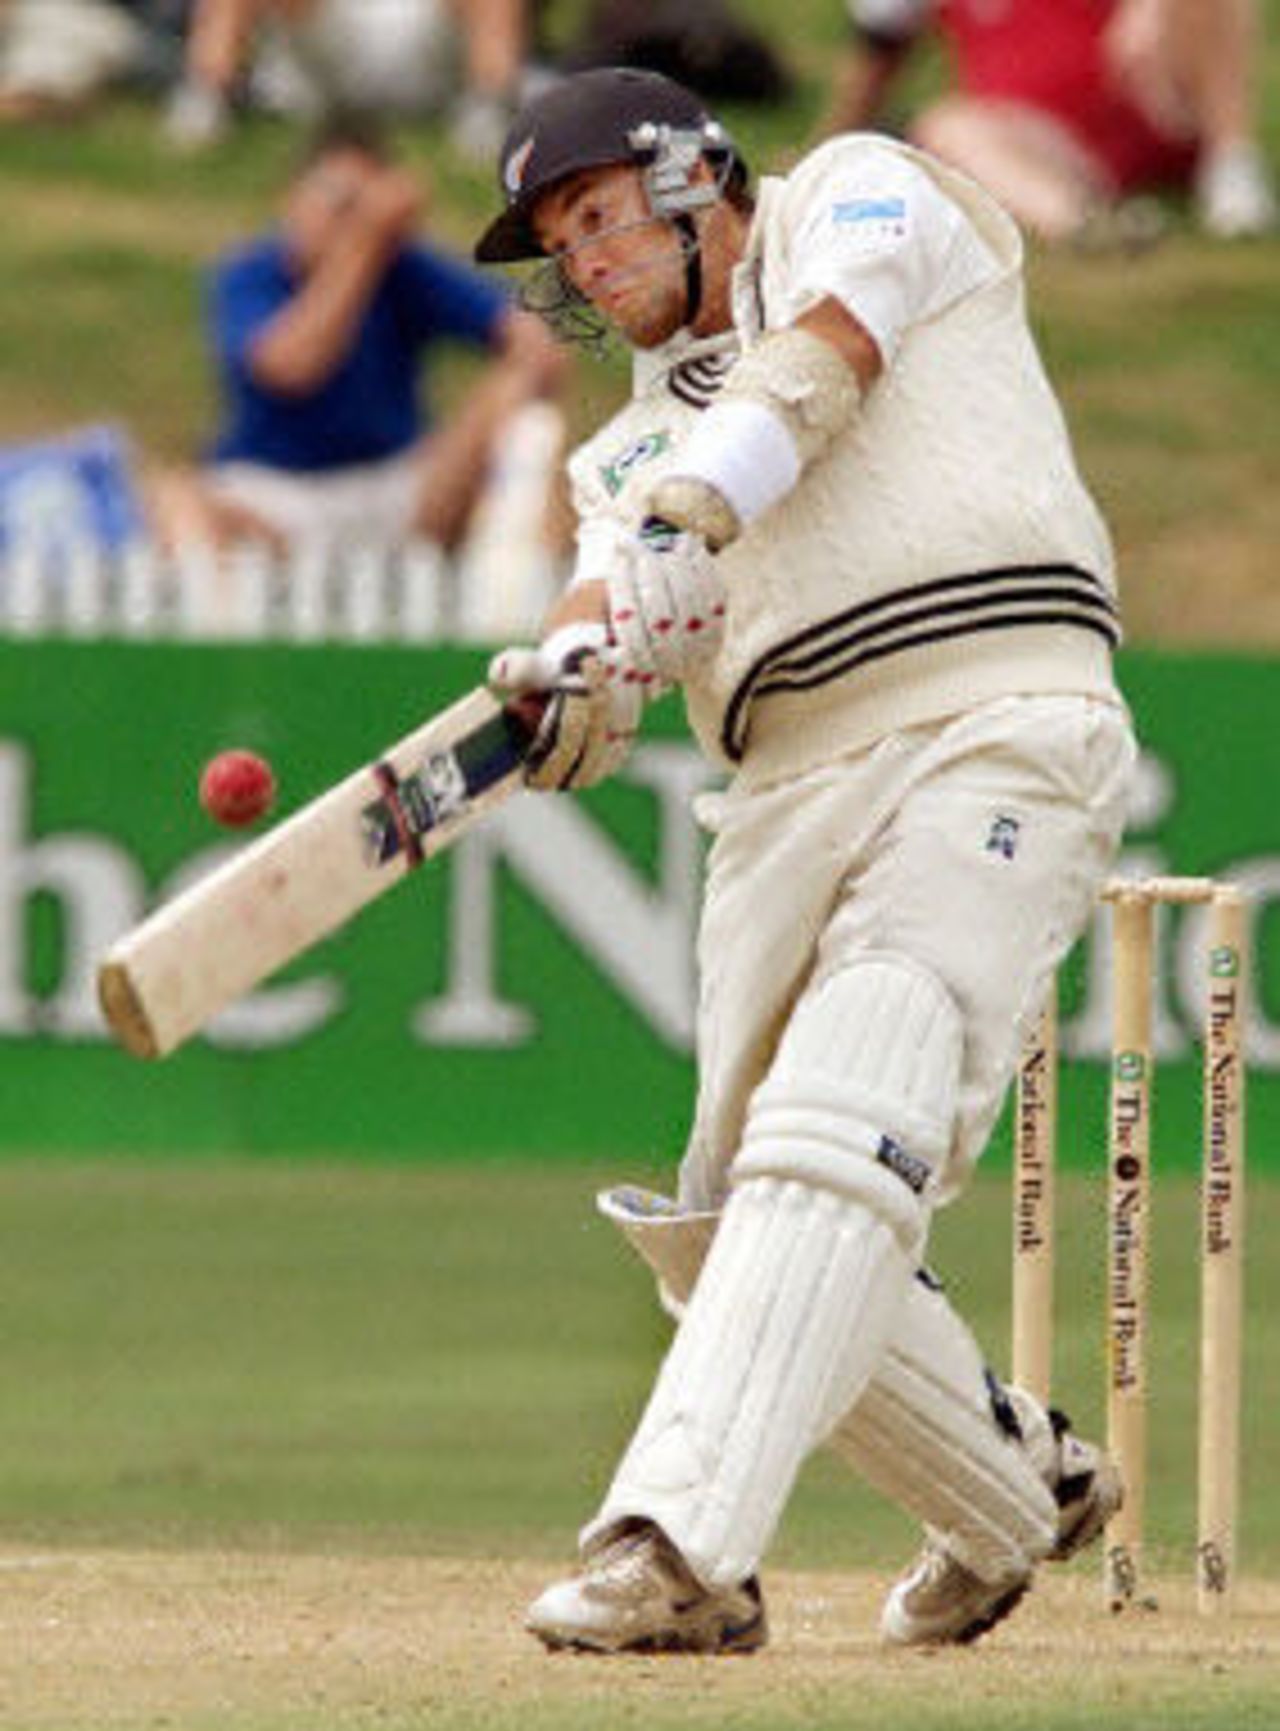 Craig McMillan slams a ball over the boundary, as he goes on a run scoring feast which included a world record 26 runs off an over from bowler Younis Khan, day 4, third Test, Hamilton 30 March 2001.